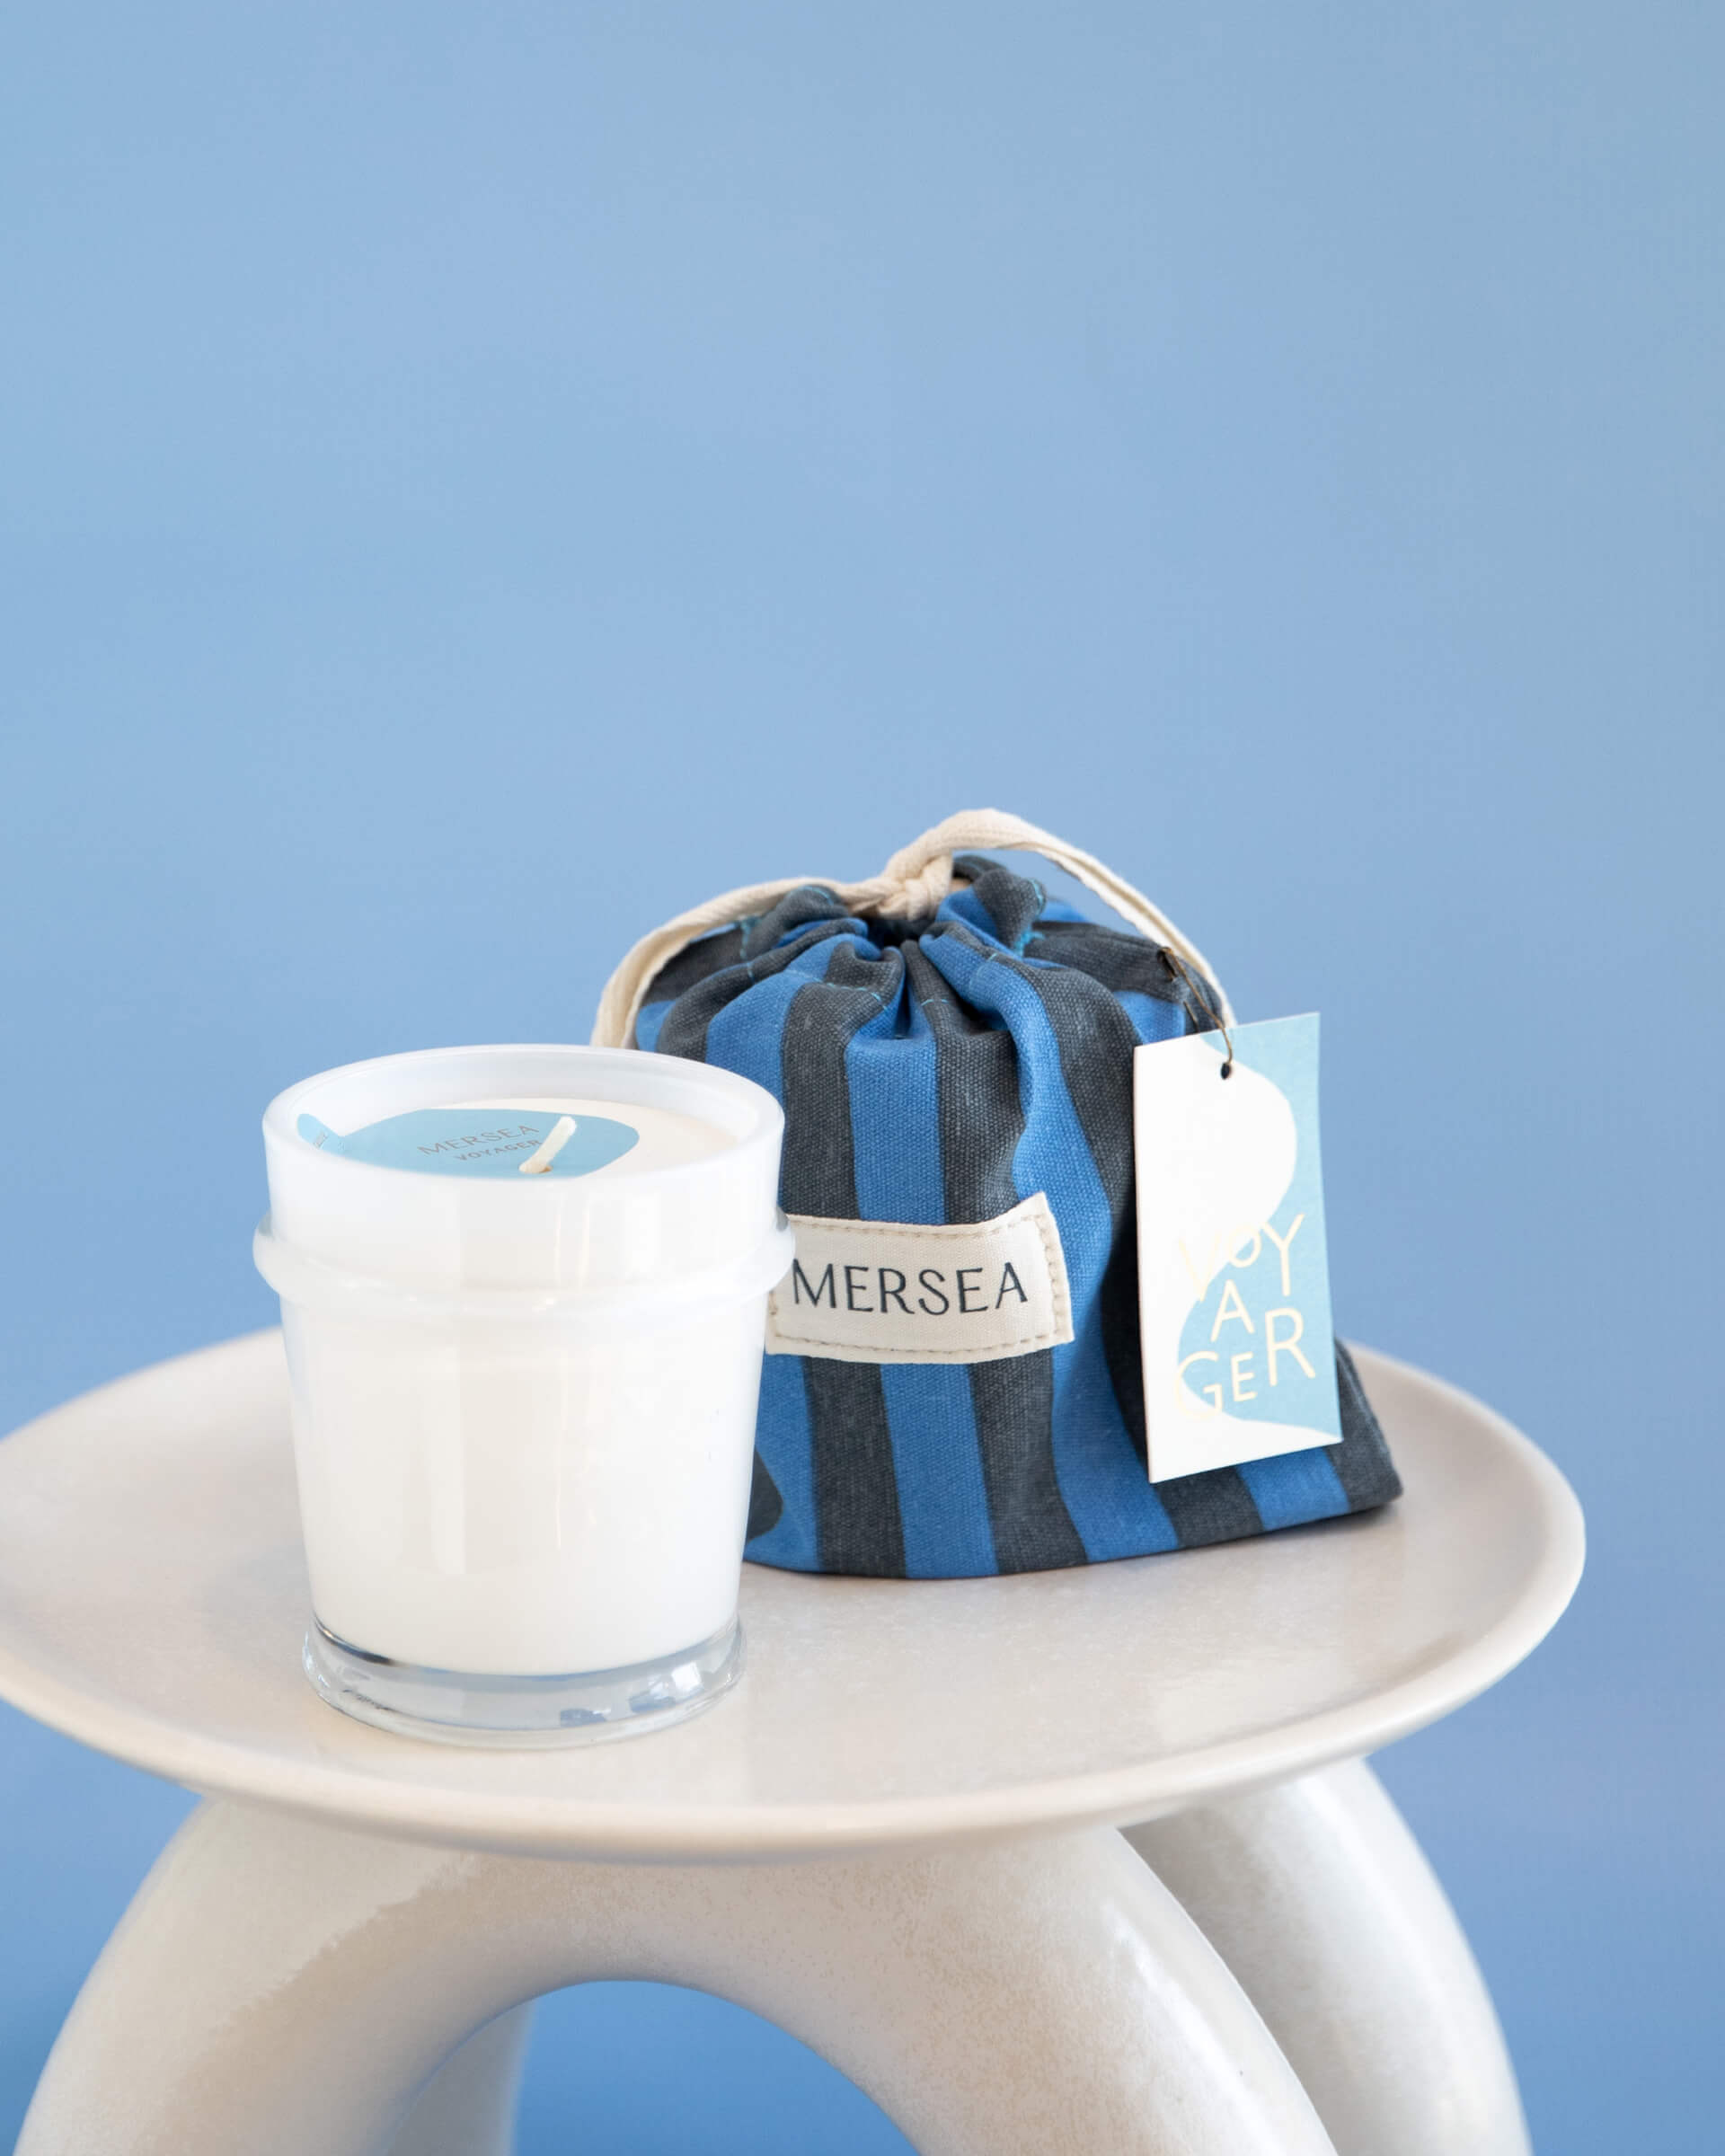 6.5 oz voyager sandbag candle in blue and navy striped bag on a blue background